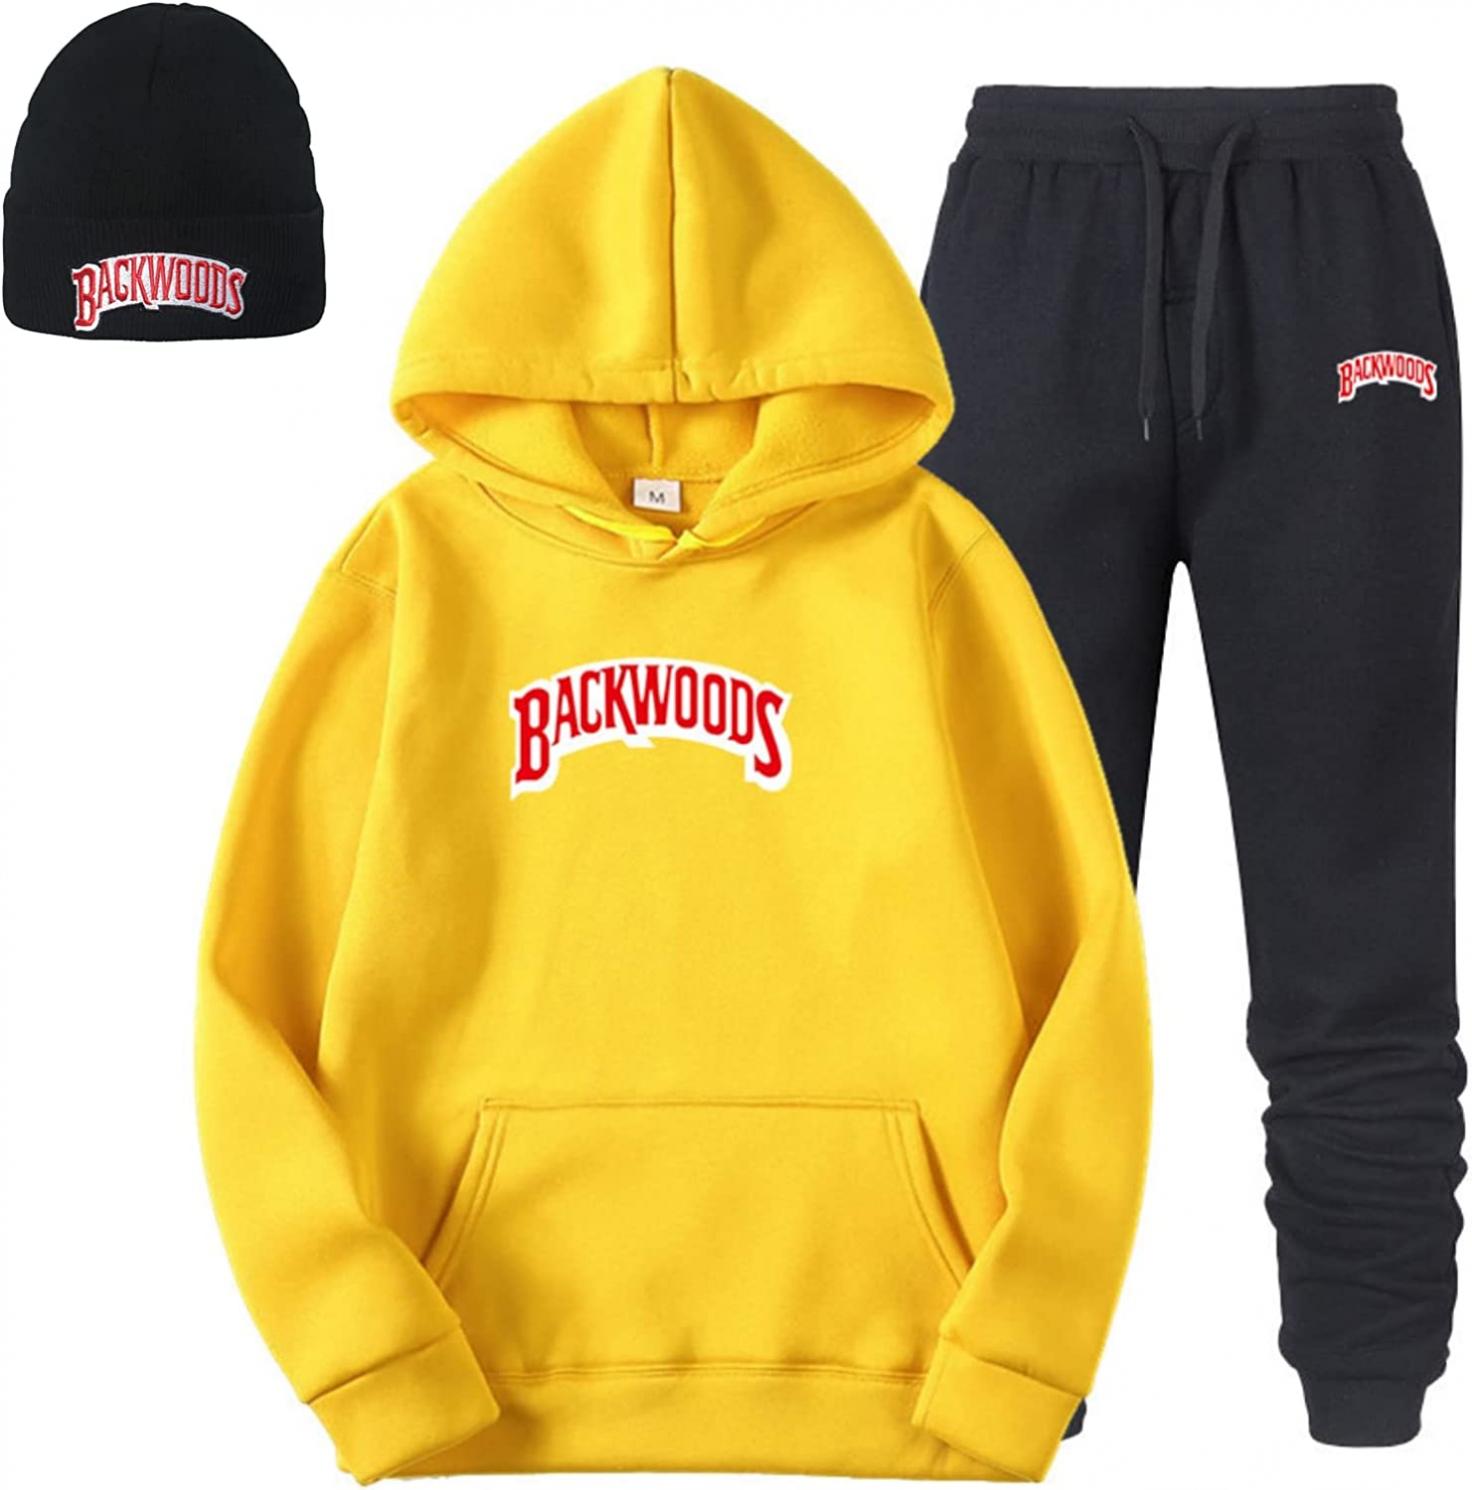 Backwoods Hoodie and Sweatpants with Hat Backwoods Pullover Sweatshirt and Pants Backwoods Casual Tracksuit for Men